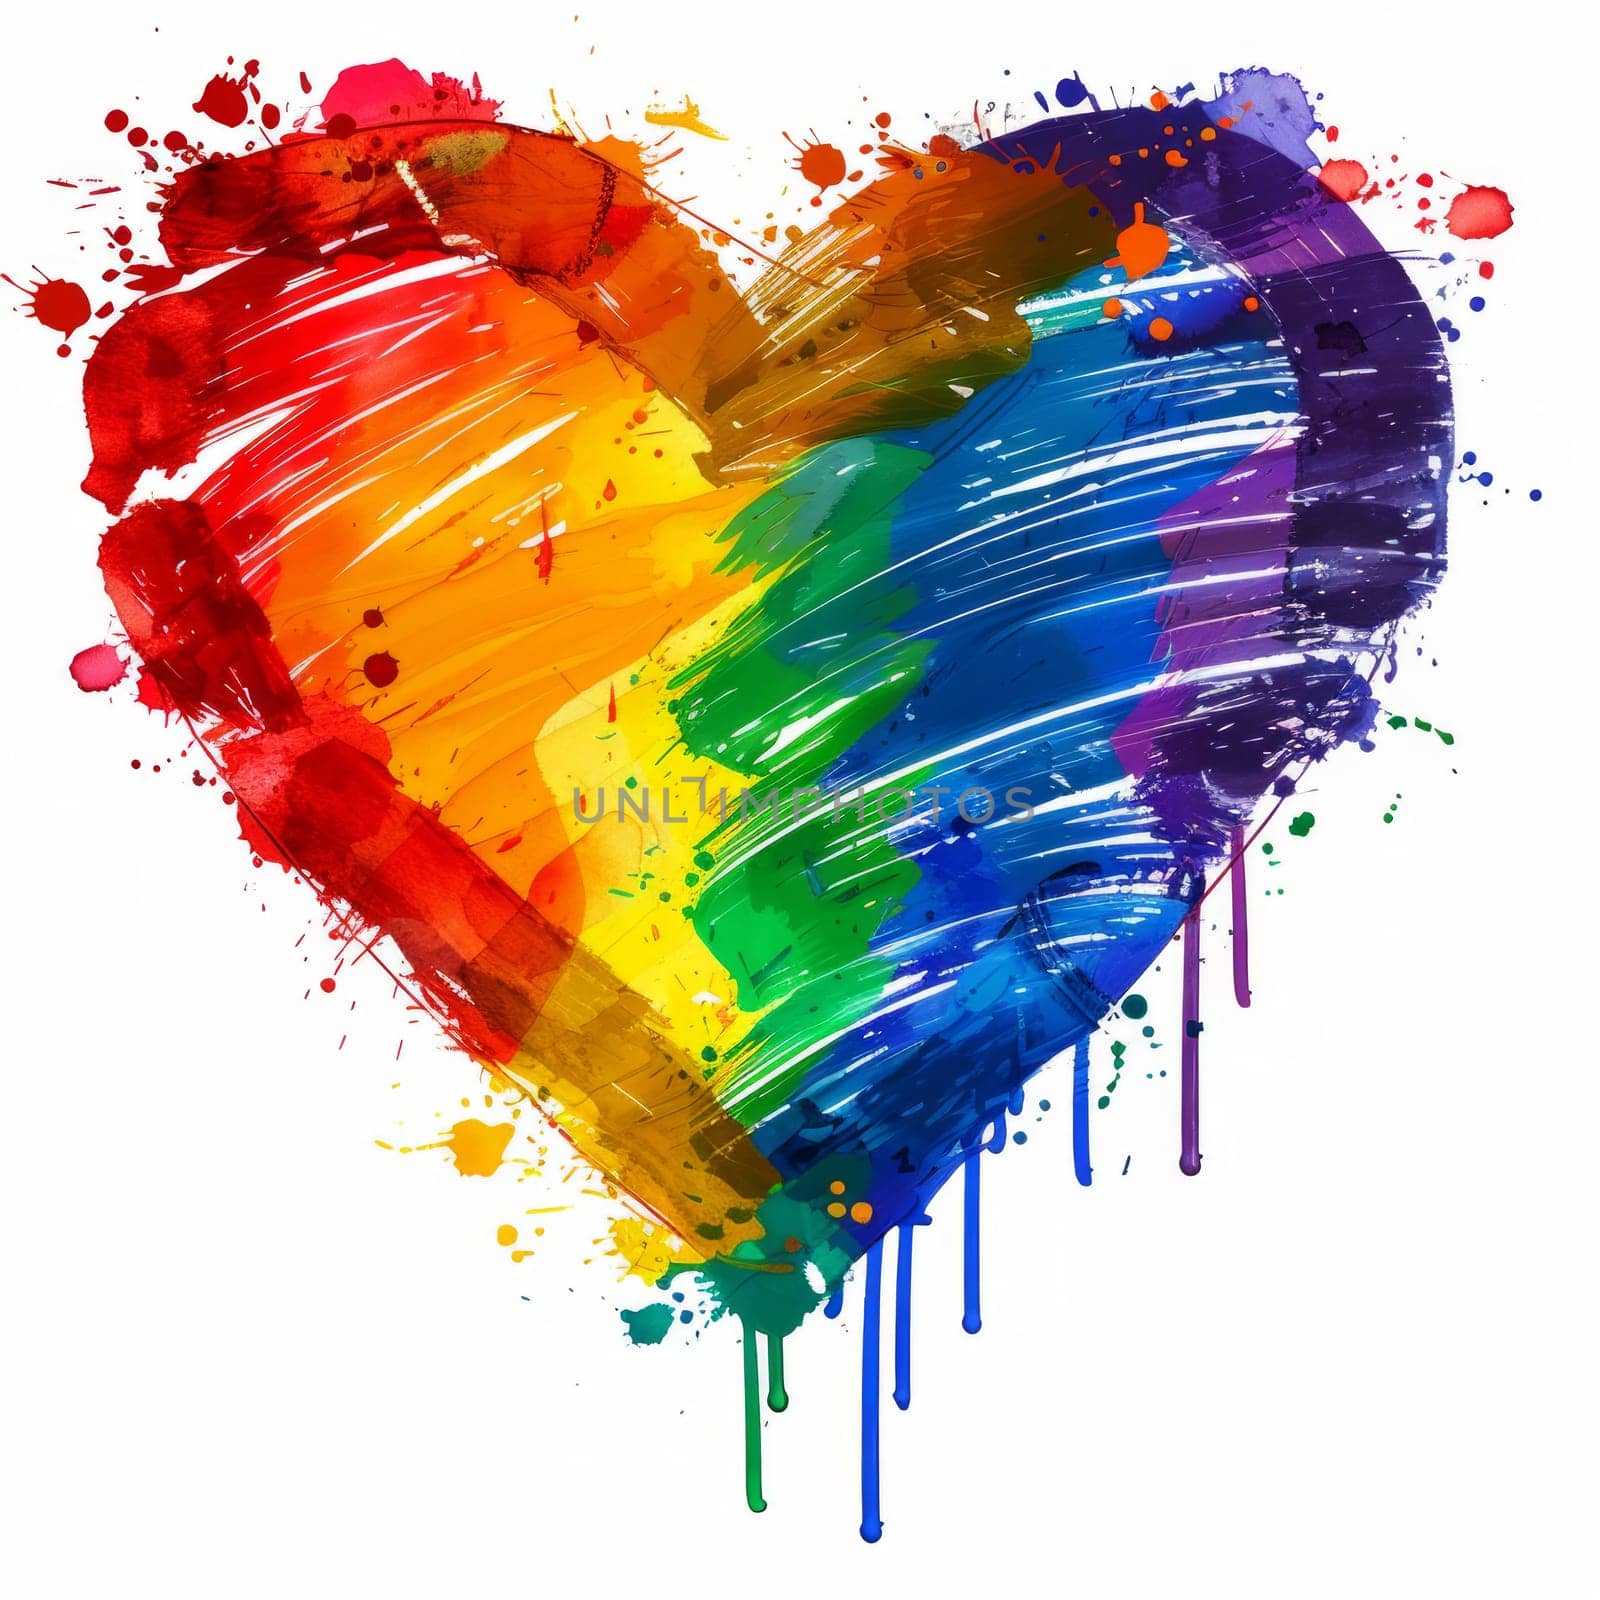 A lgbtq rainbow heart in watercolor style on white background. Concept of gender diversity.